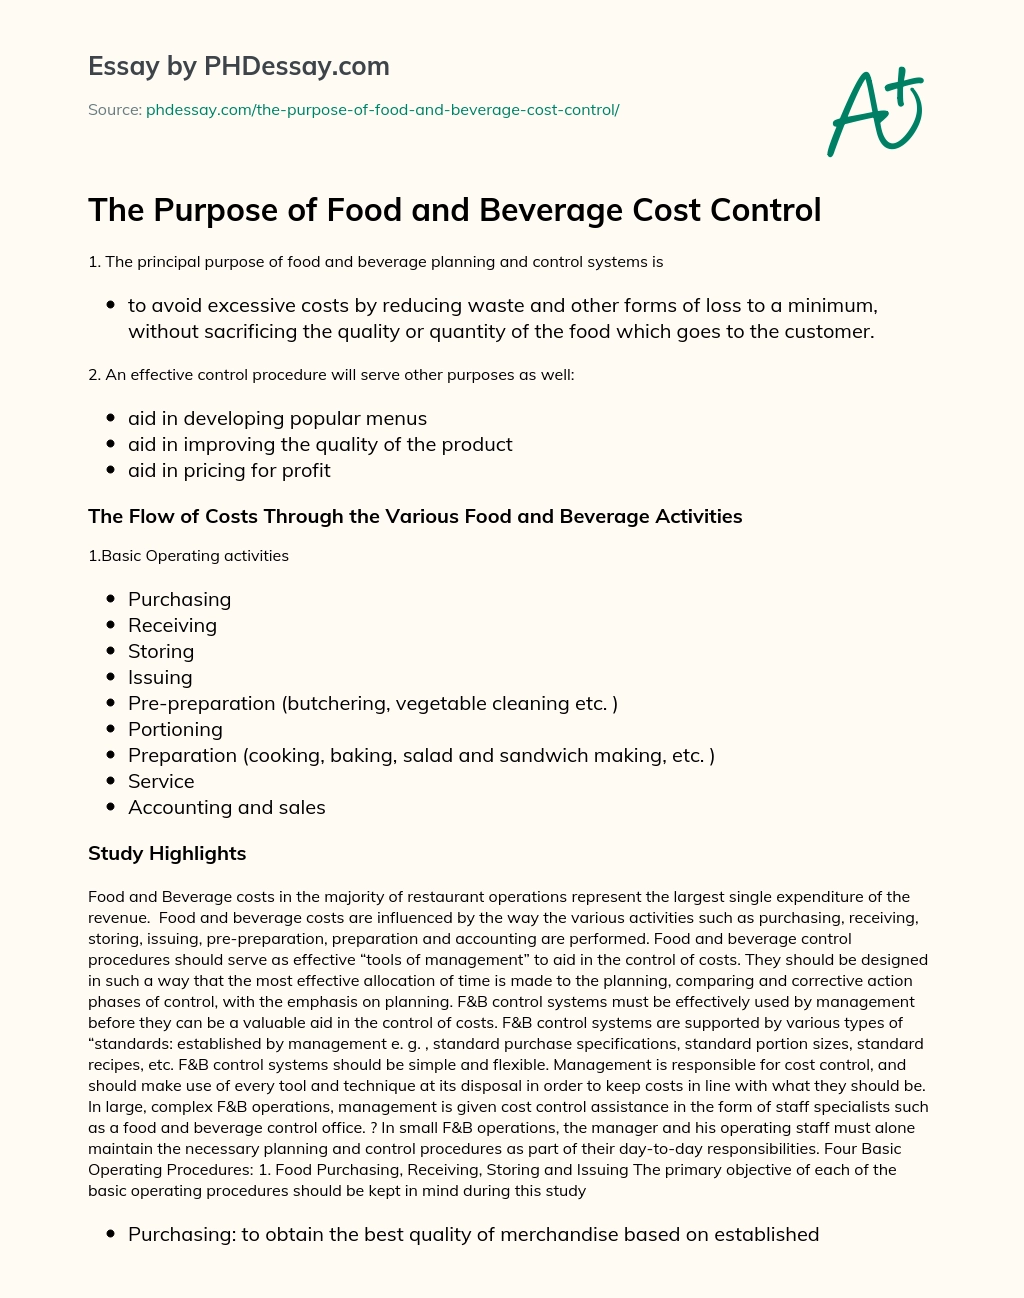 The Purpose of Food and Beverage Cost Control essay